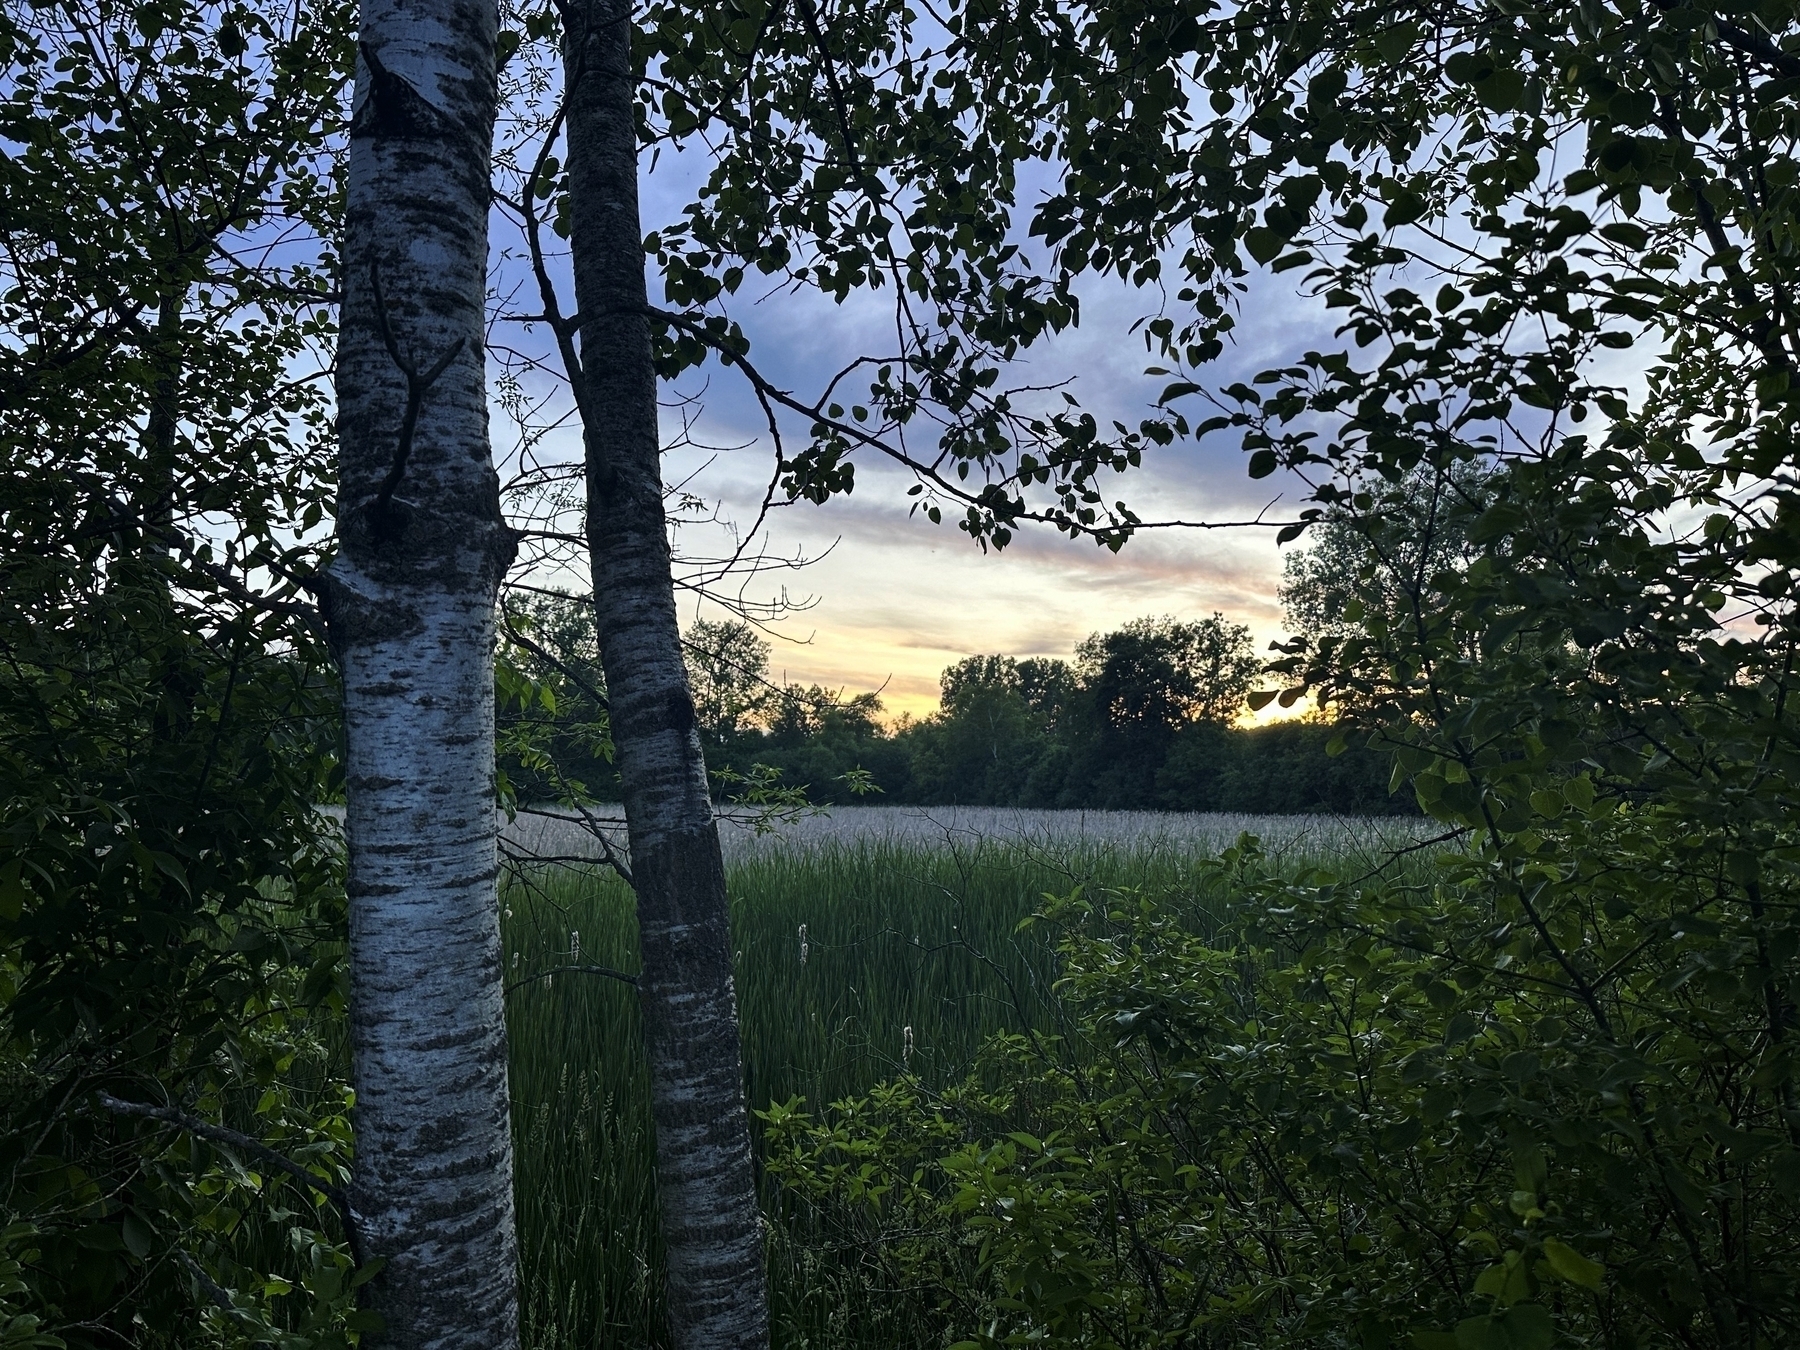 Two birch trees stand among dense green foliage at sunset their white bark contrasting against the surrounding lush vegetation in a forested area with tall grasses and trees in the background.